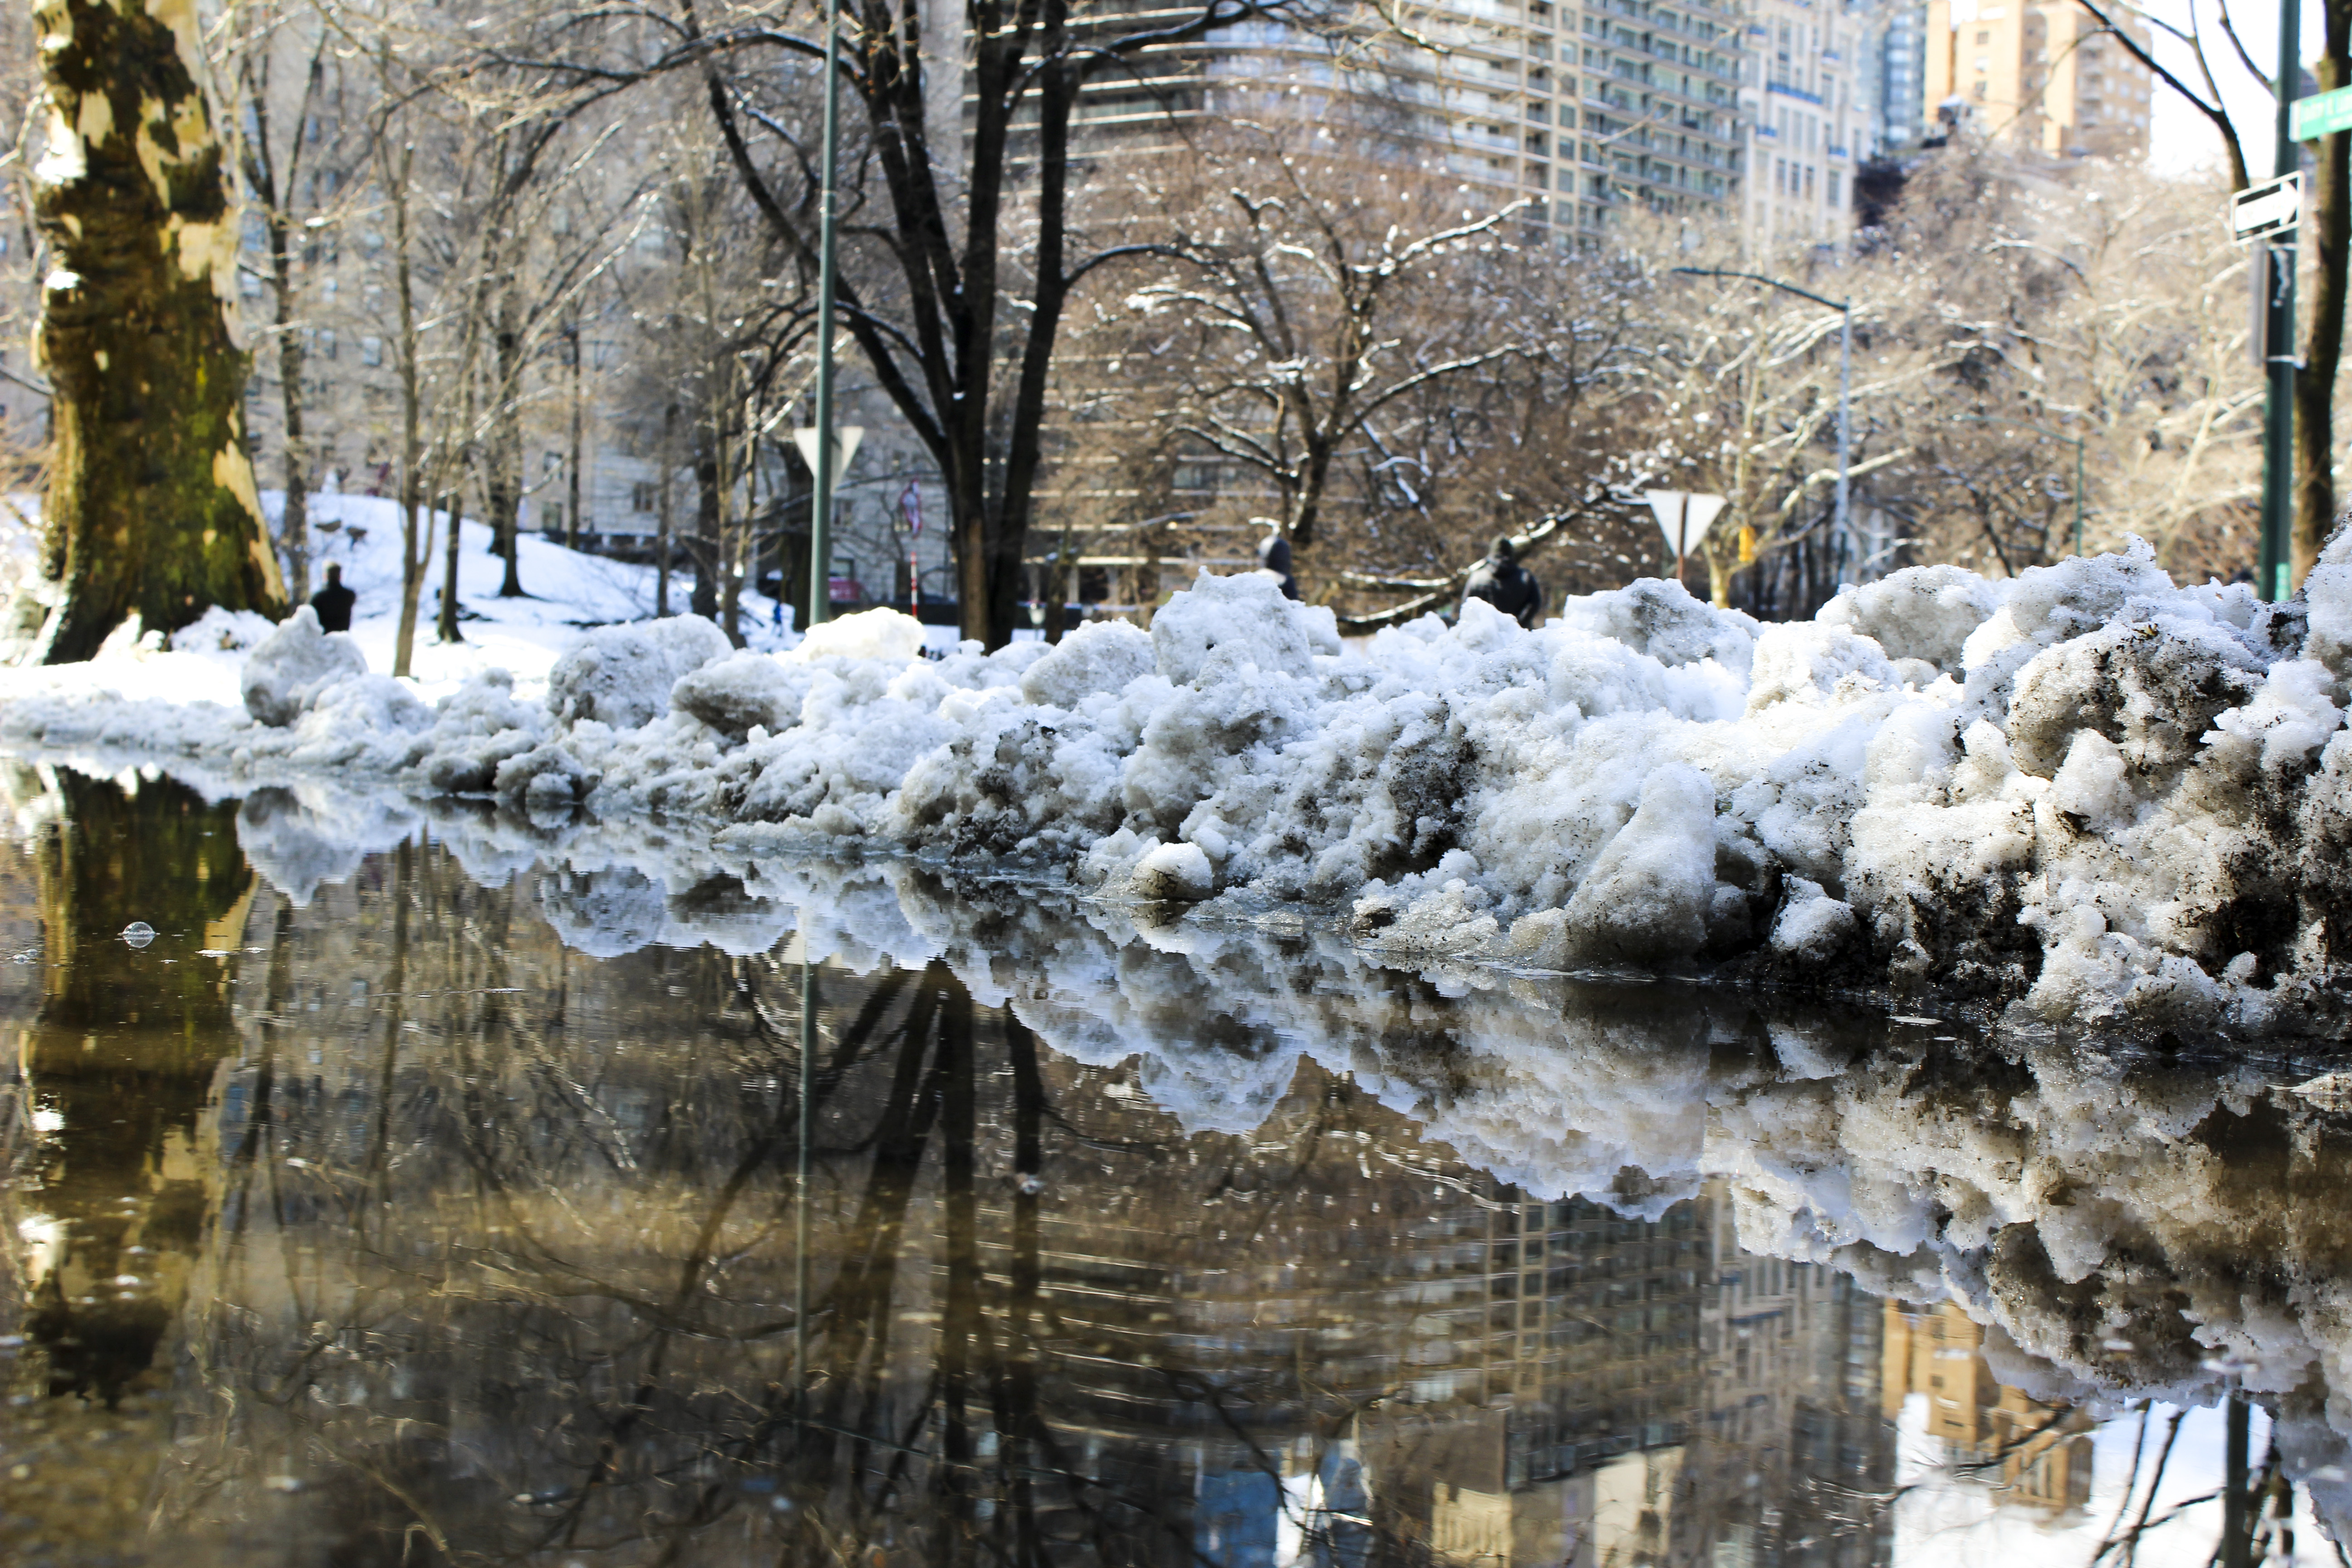 Snow pile in Central Park.